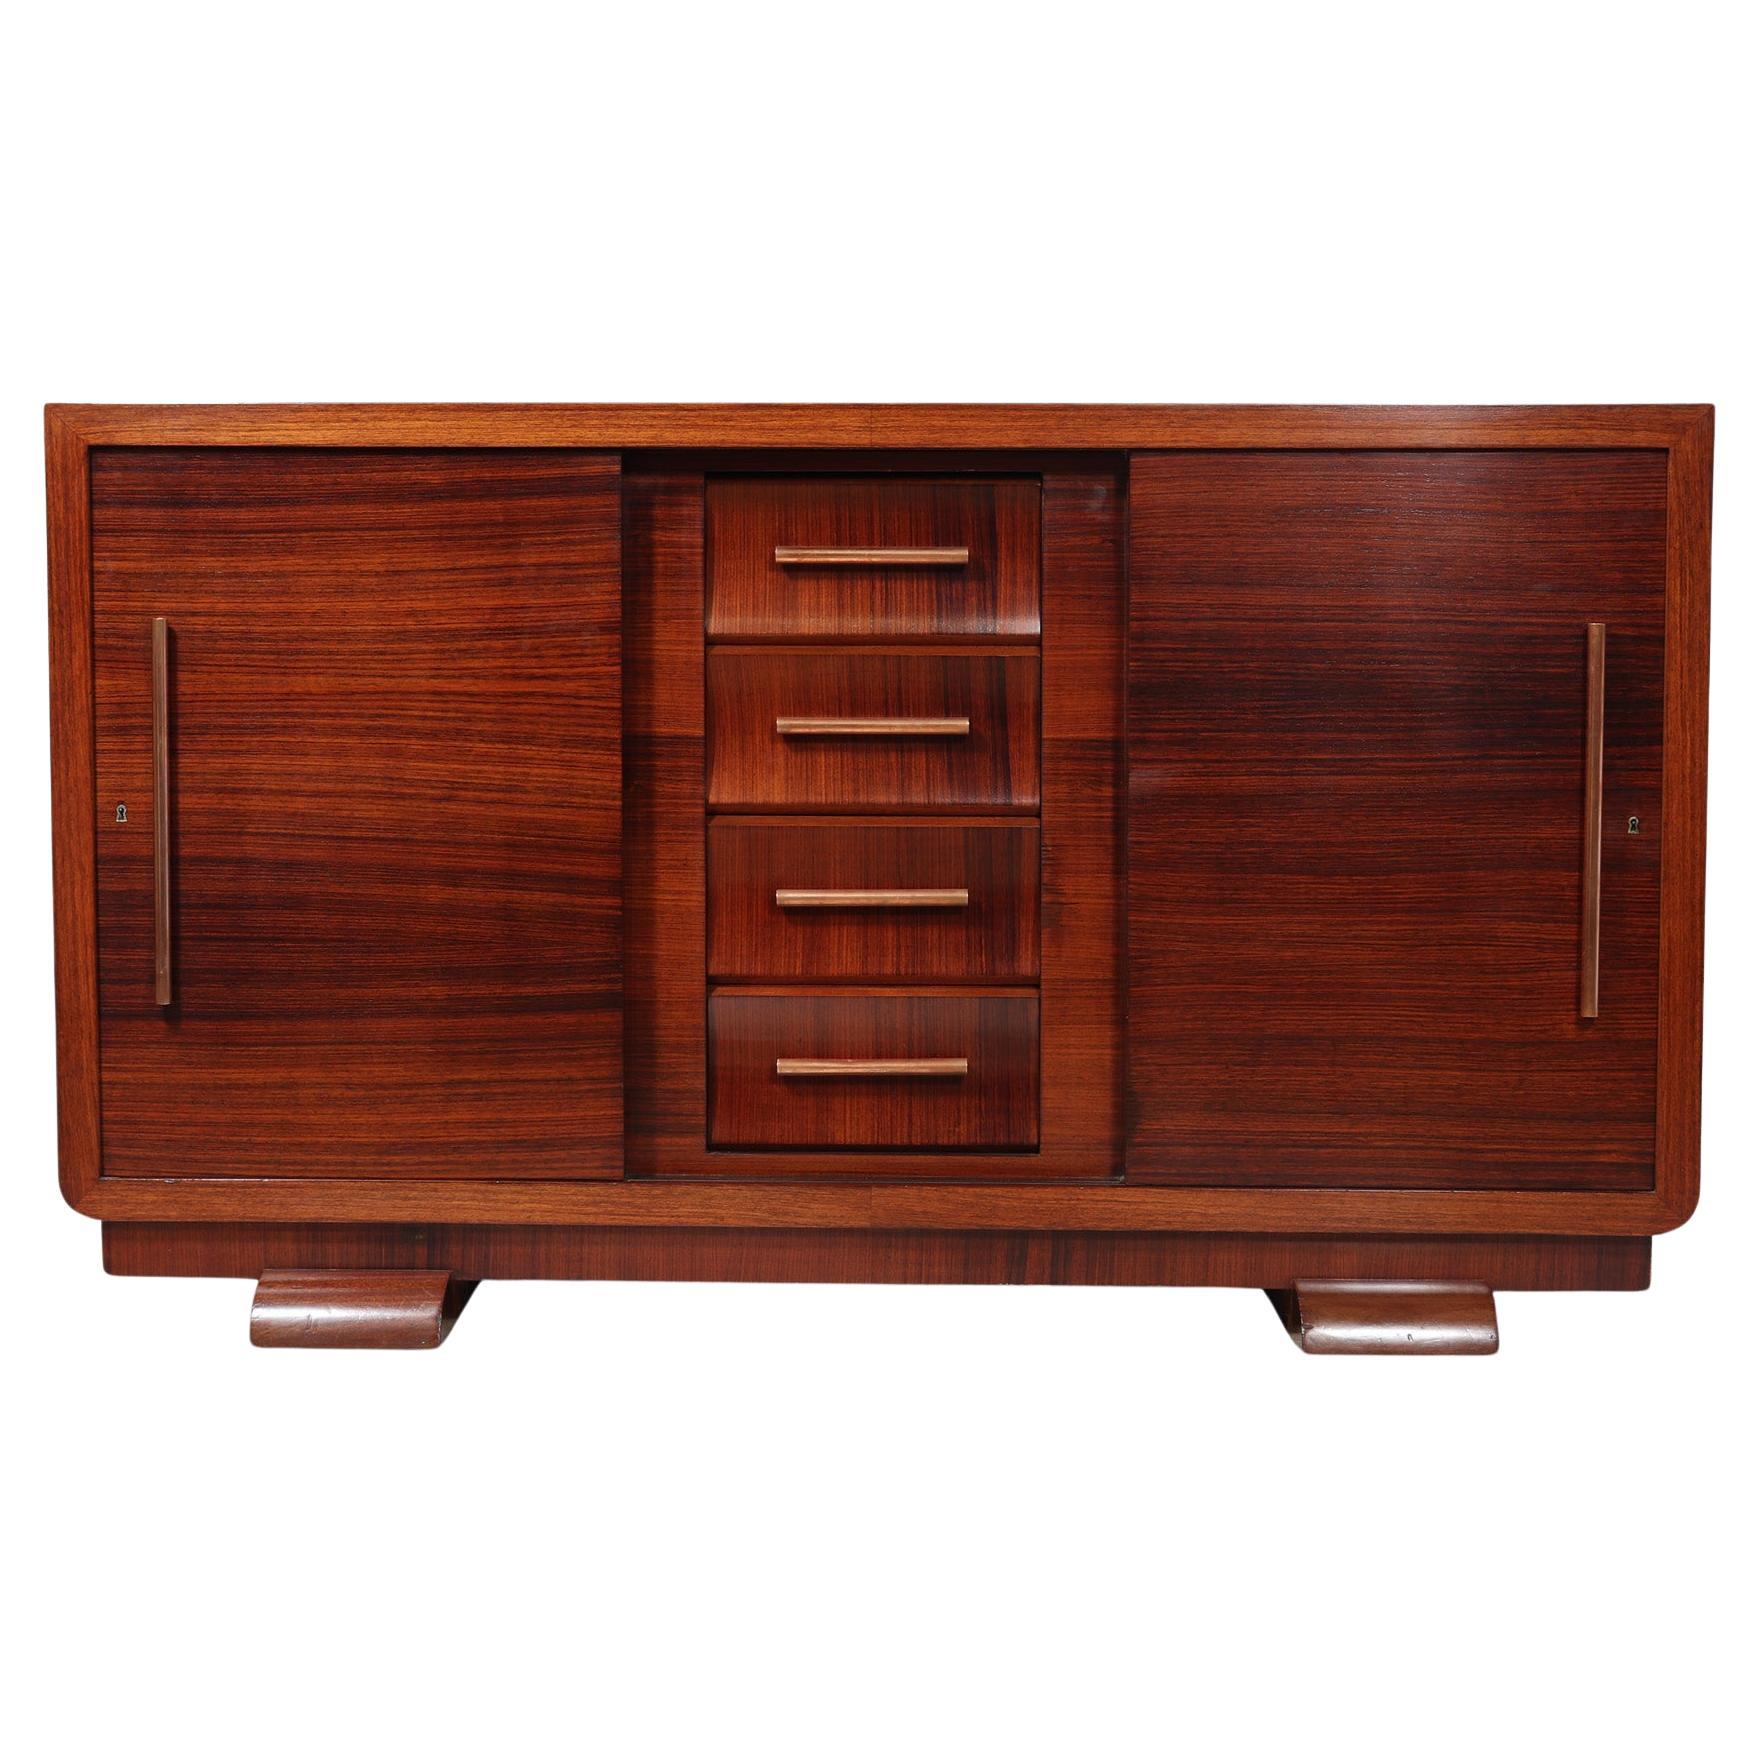 French Art Deco Sideboard with Sliding Doors For Sale